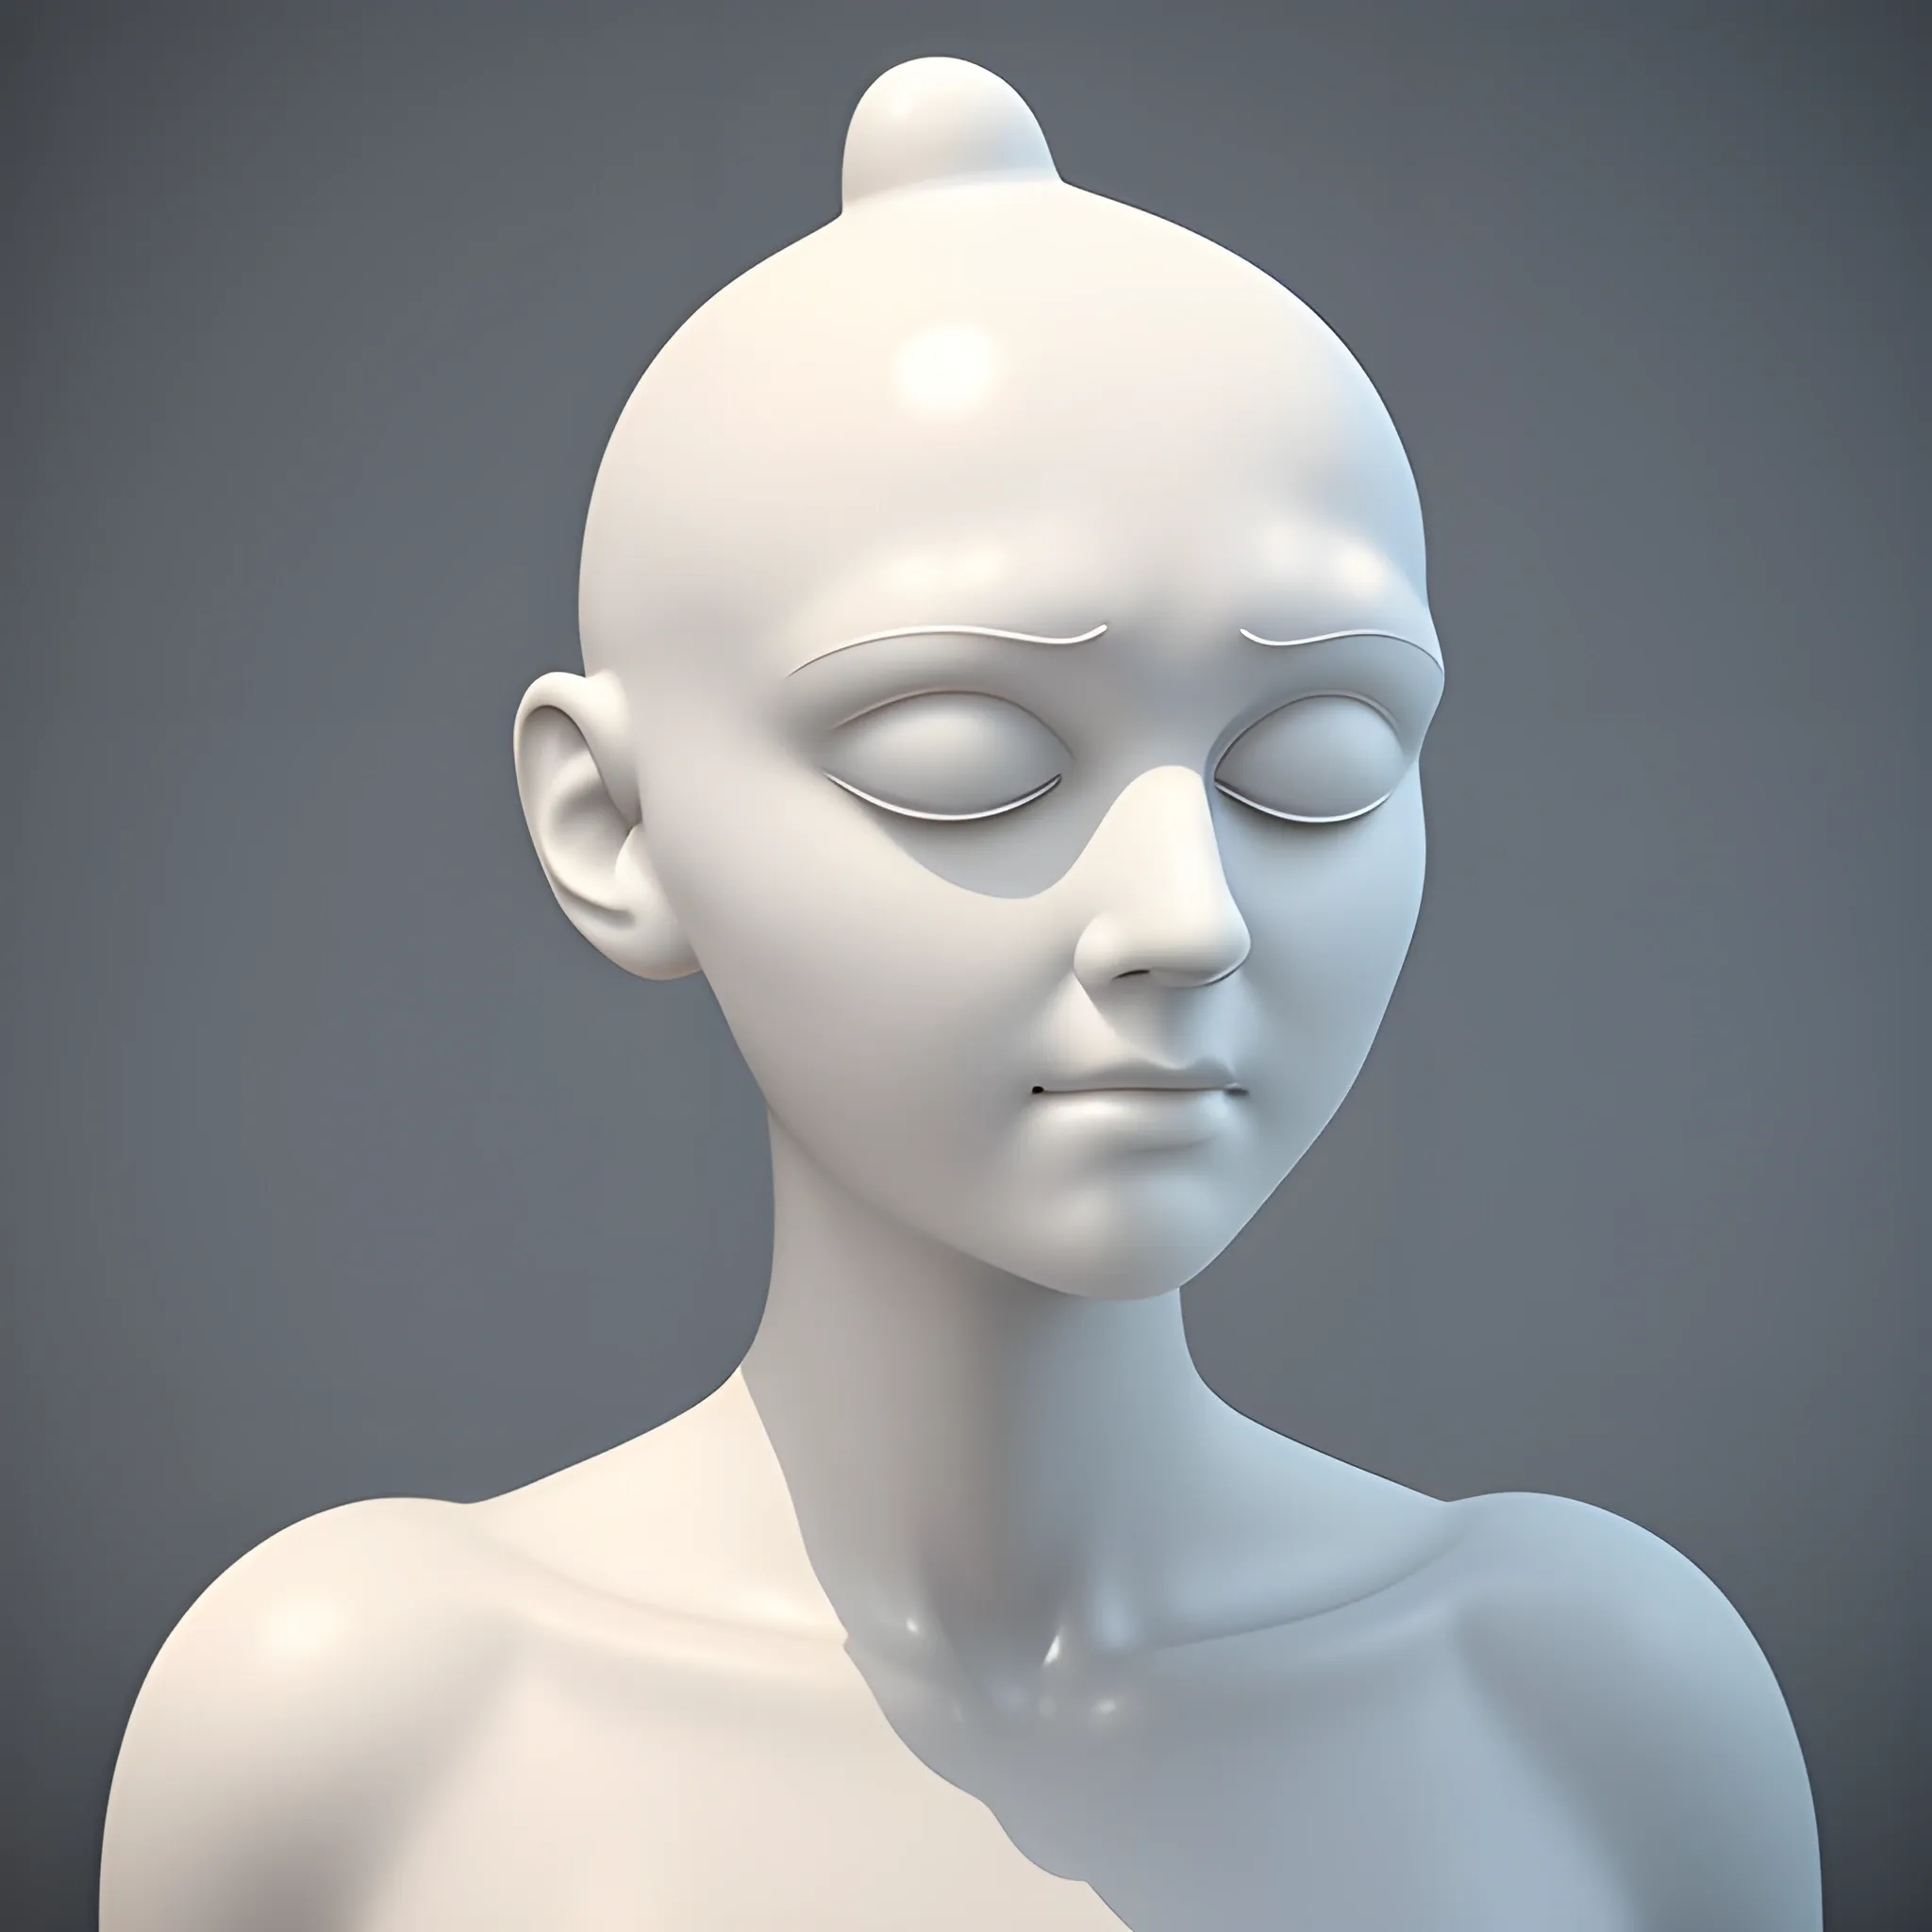 , 3D，White pulp, abstract water droplet shaped head, resembling an H-shaped body, with a relatively trendy overall style. The overall head to body ratio is 1:1 or 1:2, with a larger head and simple eyes on the face